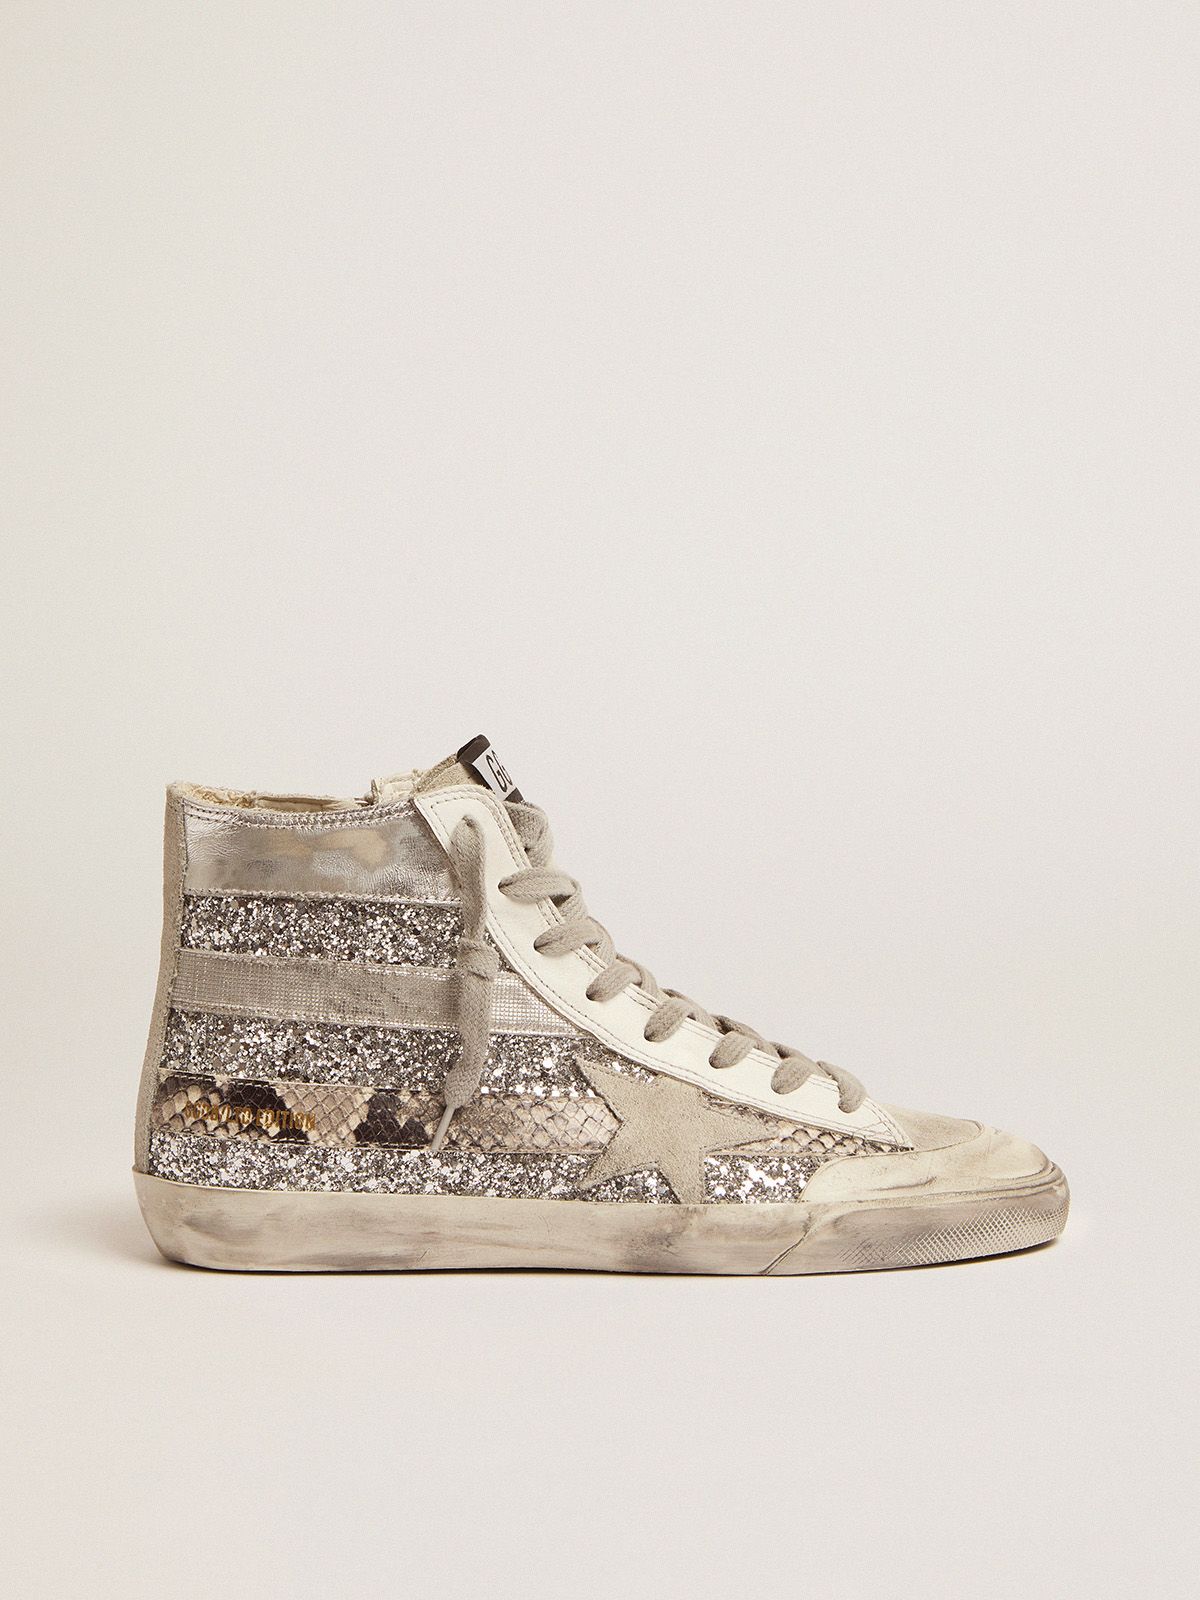 Golden Goose Uomo Saldi Francy Penstar LAB sneakers with glitter upper and silver and snake-print stripes